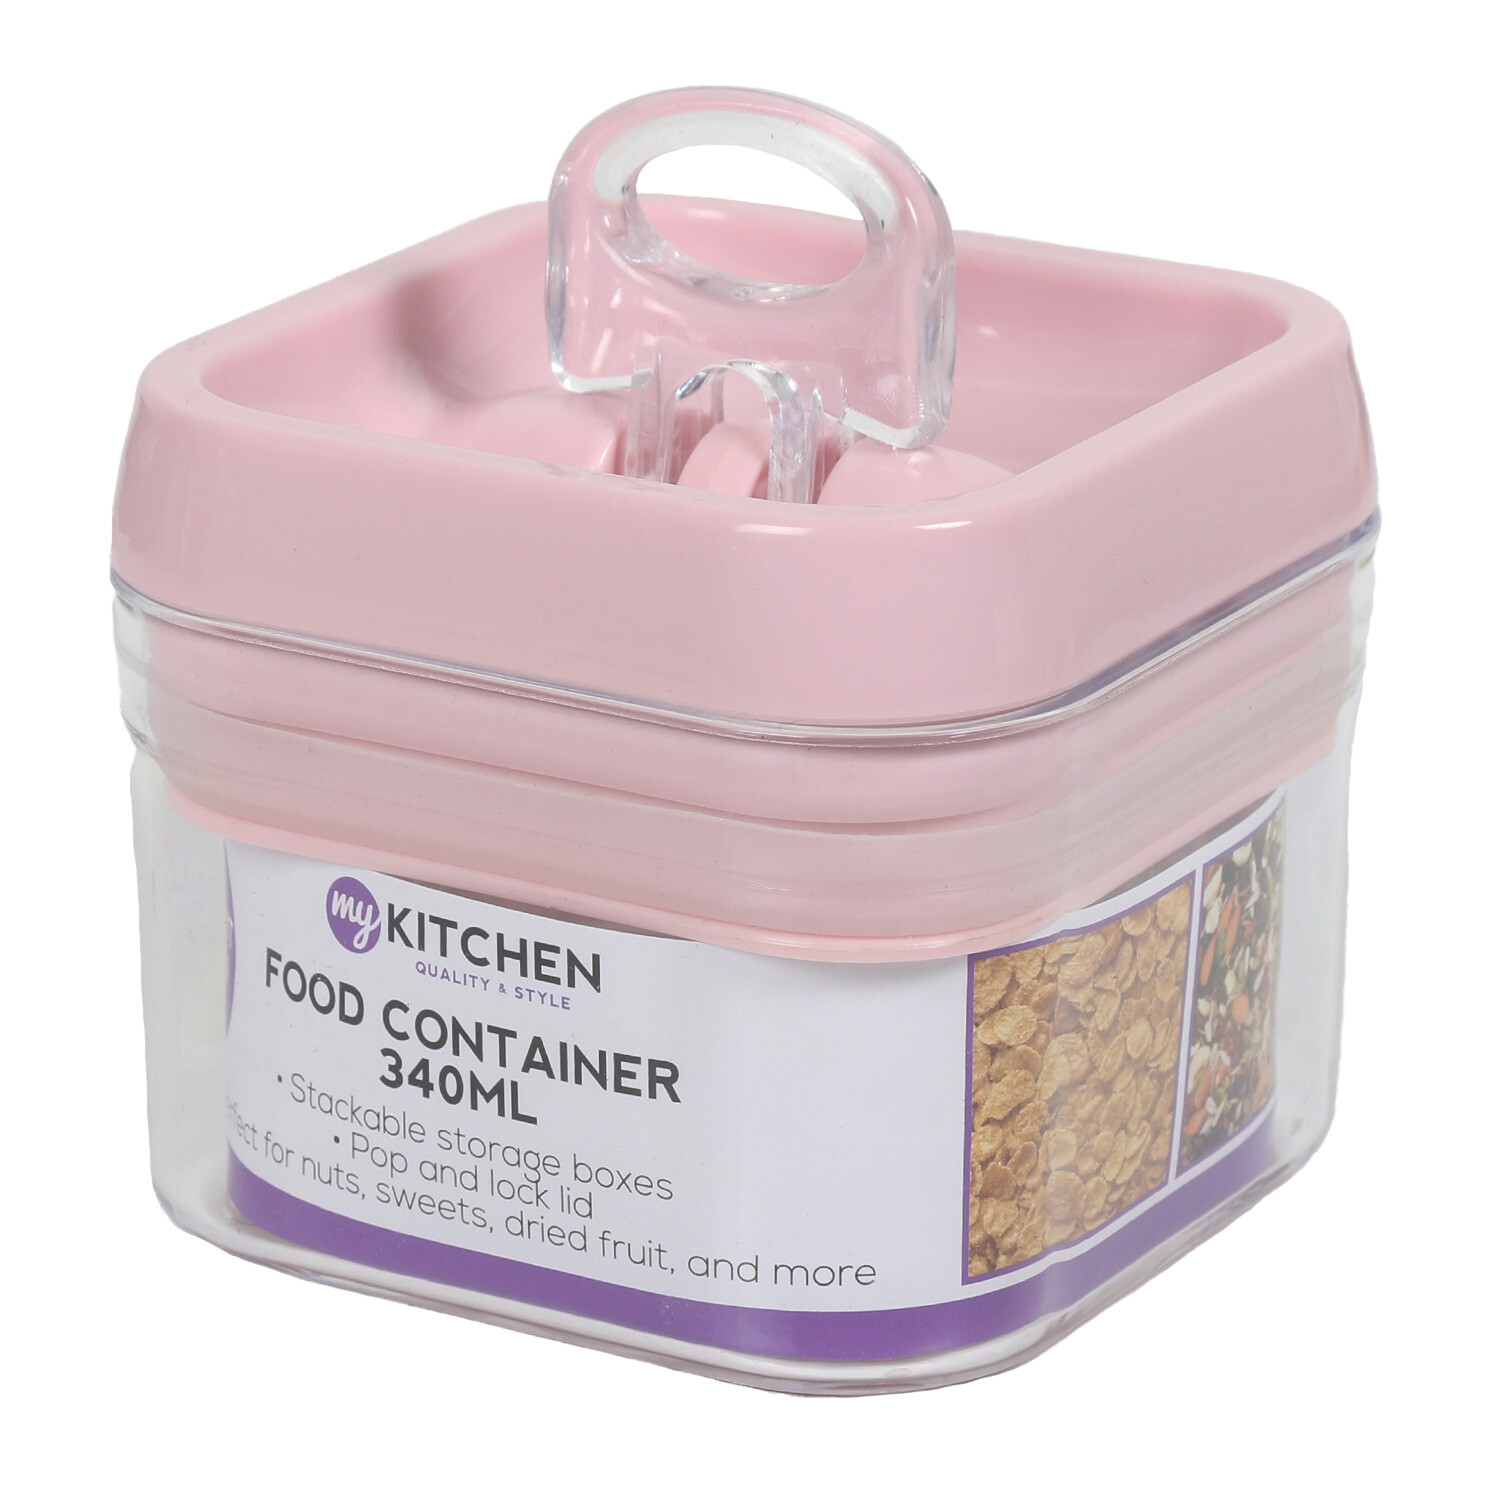 Single My Kitchen 340ml Airtight Food Container in Assorted styles Image 2